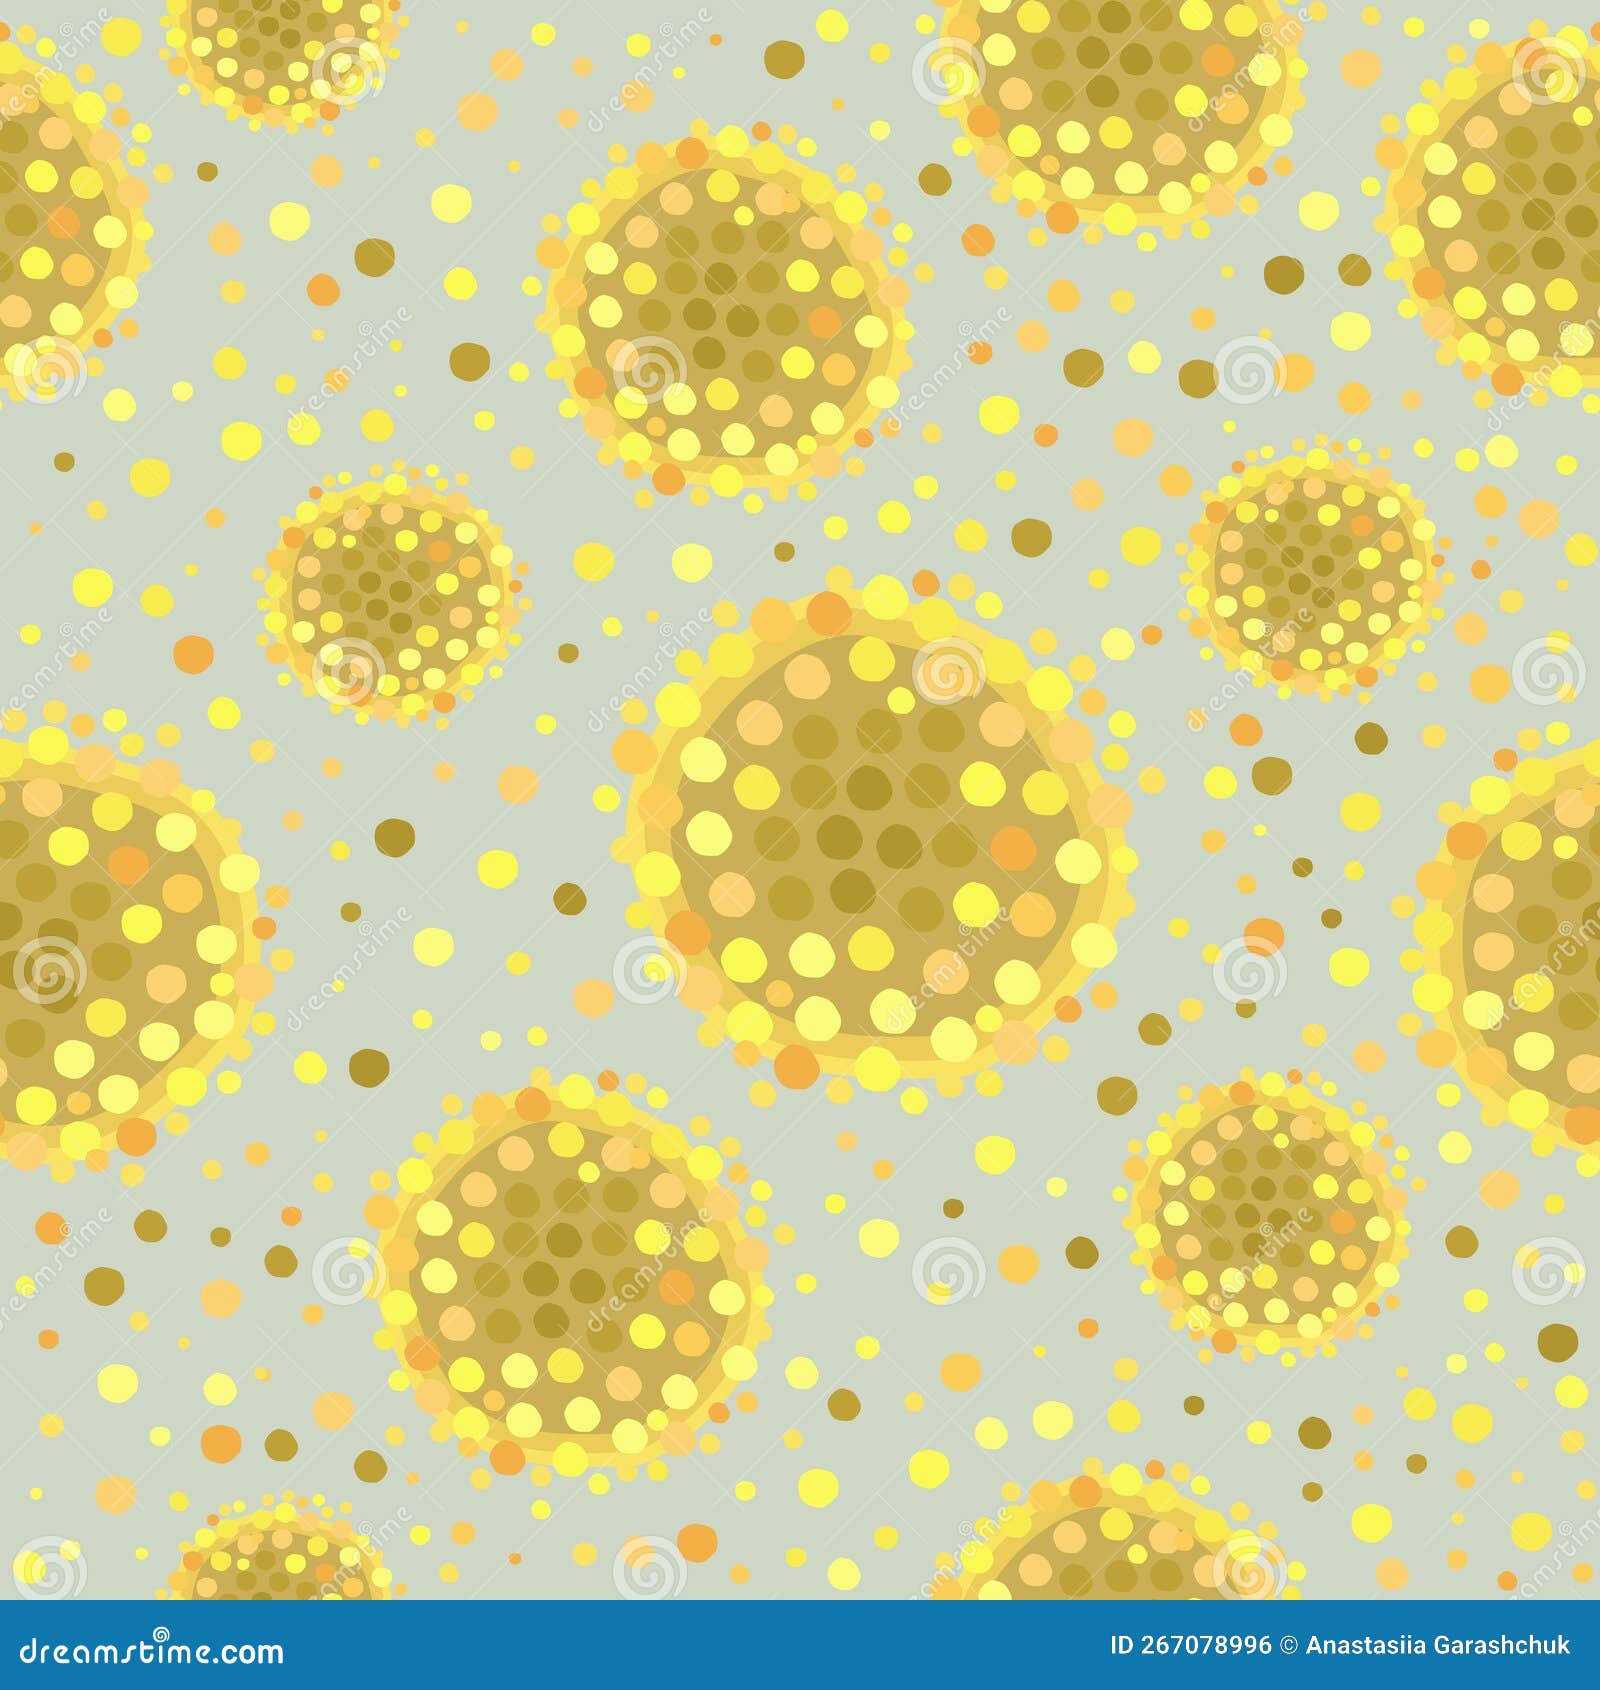  seamless abstract pattern. yellow circles on light greem background.